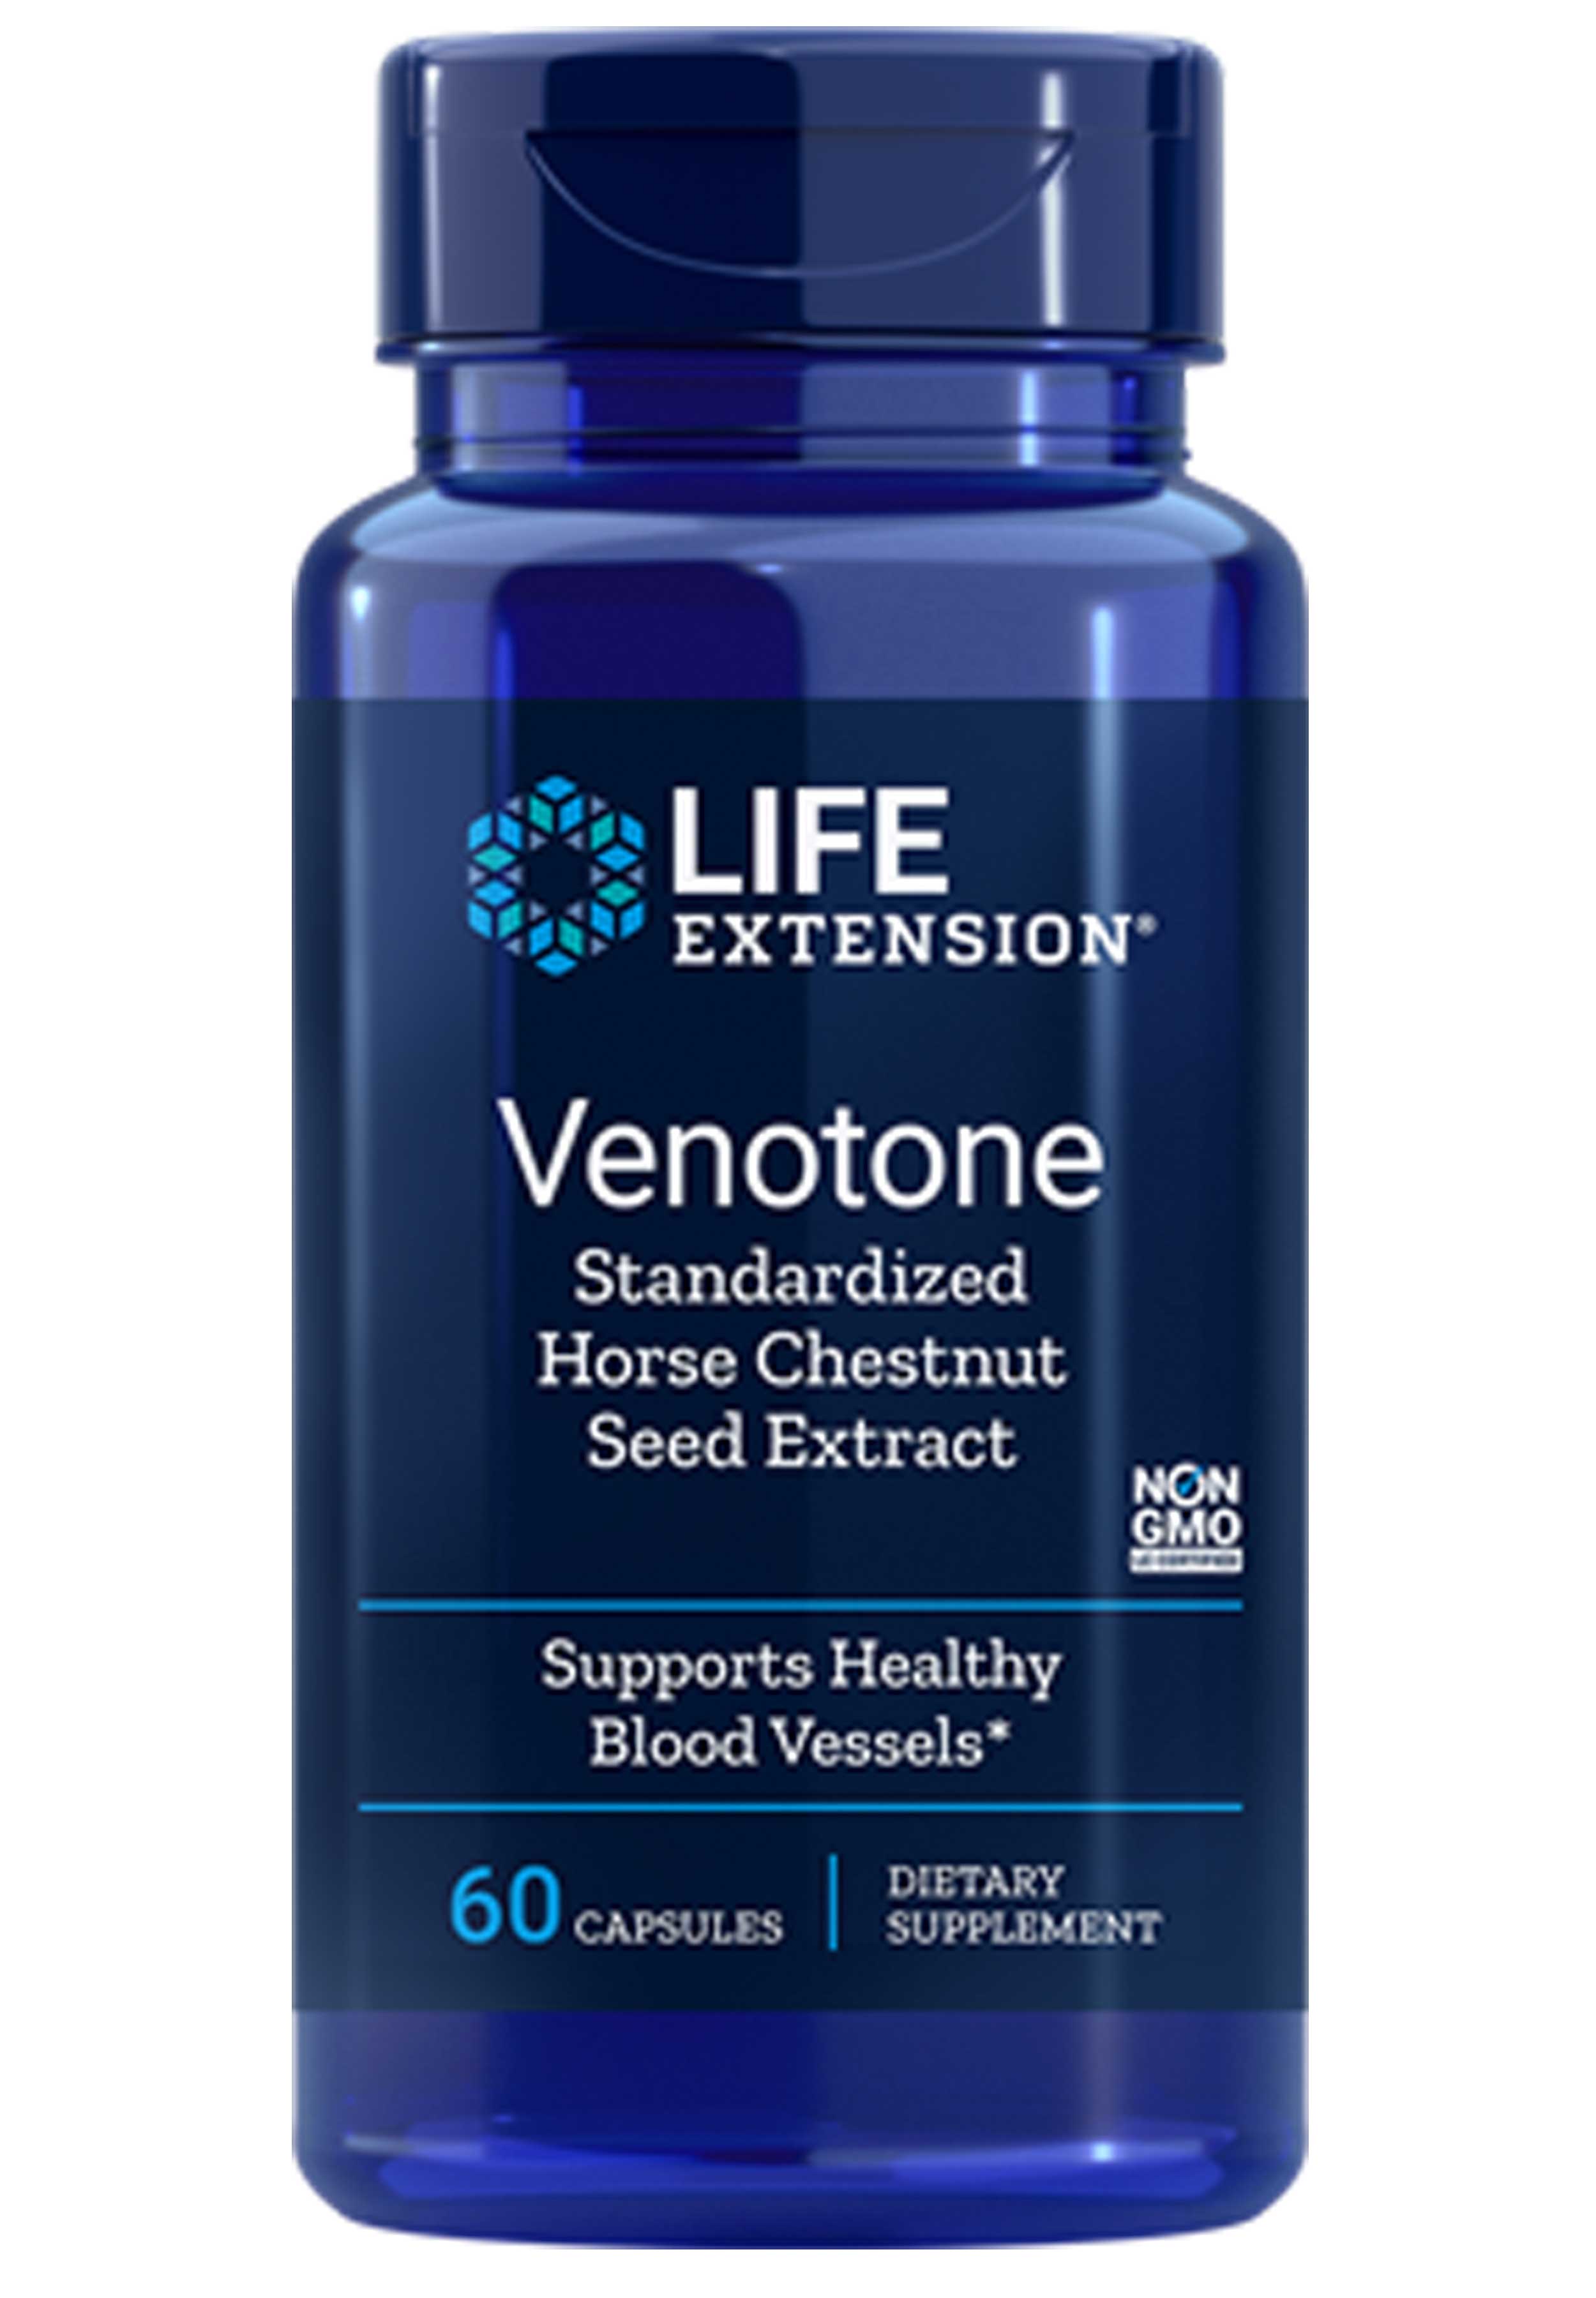 Life Extension Venotone - Standardized Horse Chestnut Seed Extract